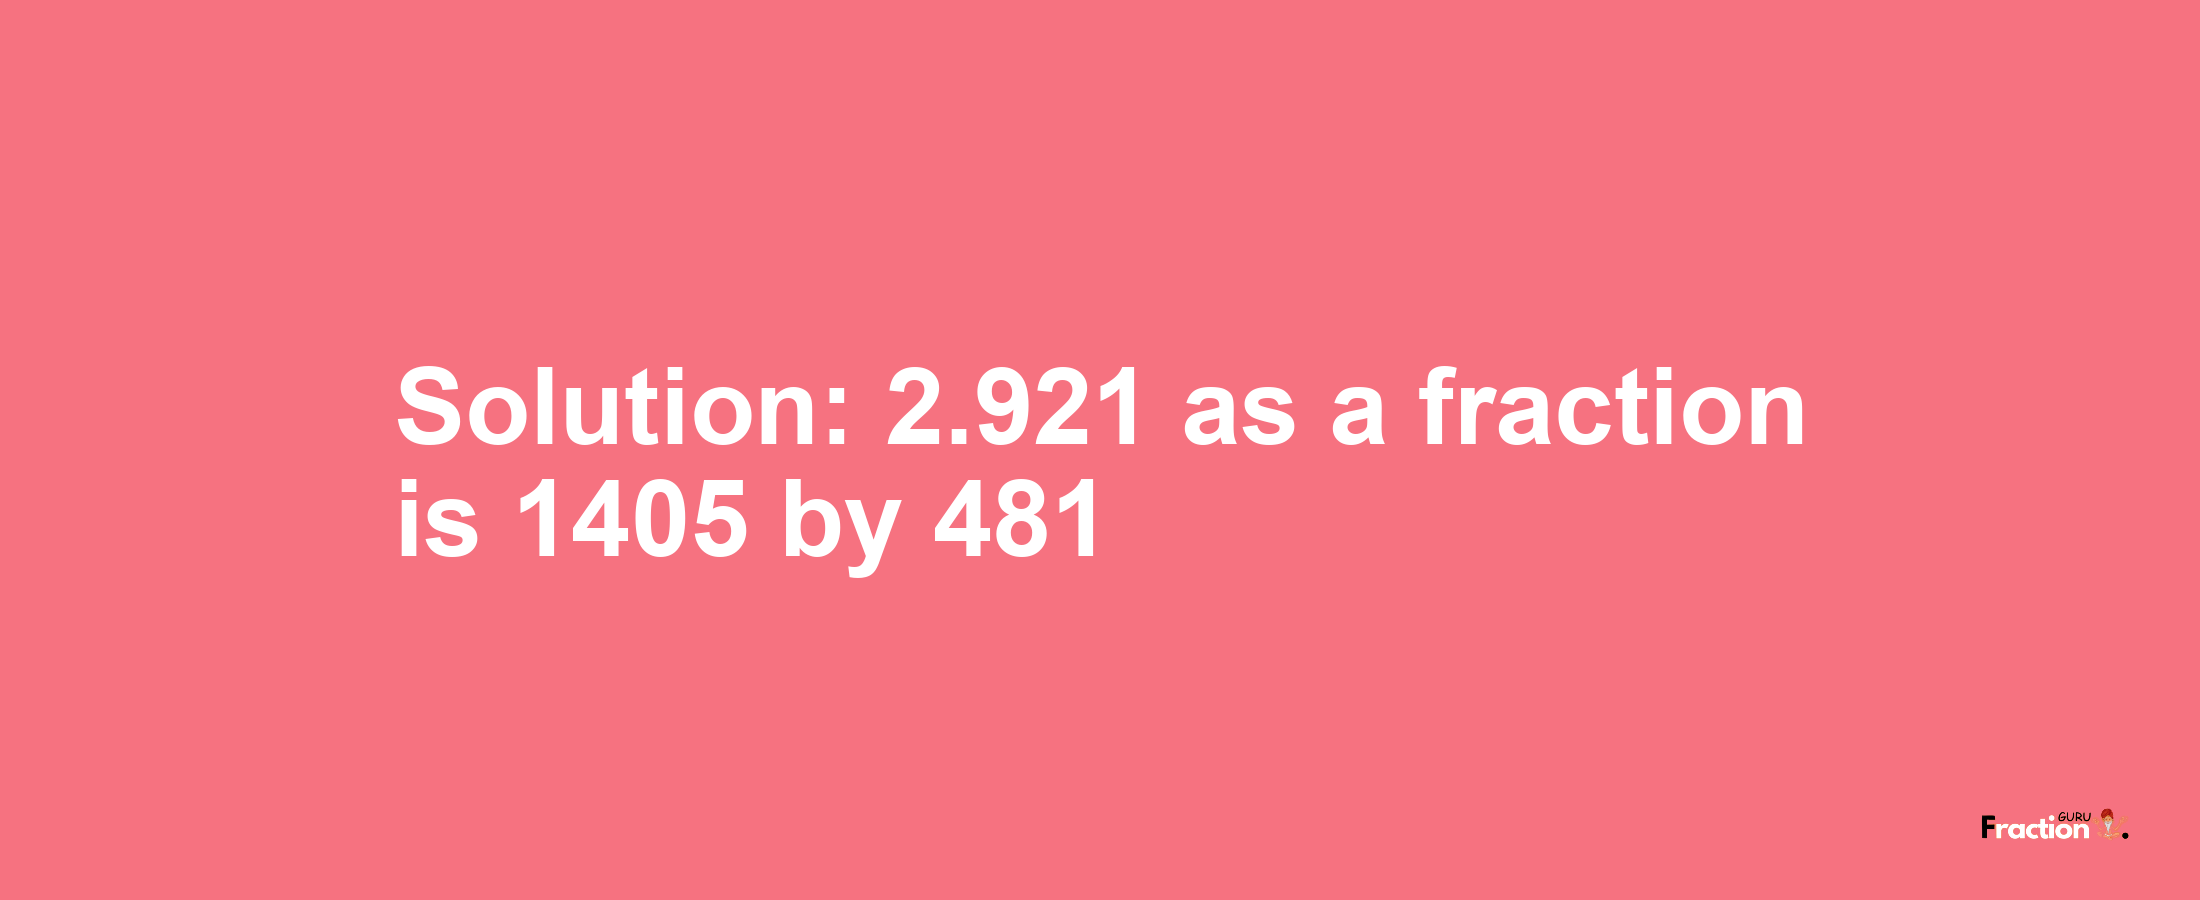 Solution:2.921 as a fraction is 1405/481